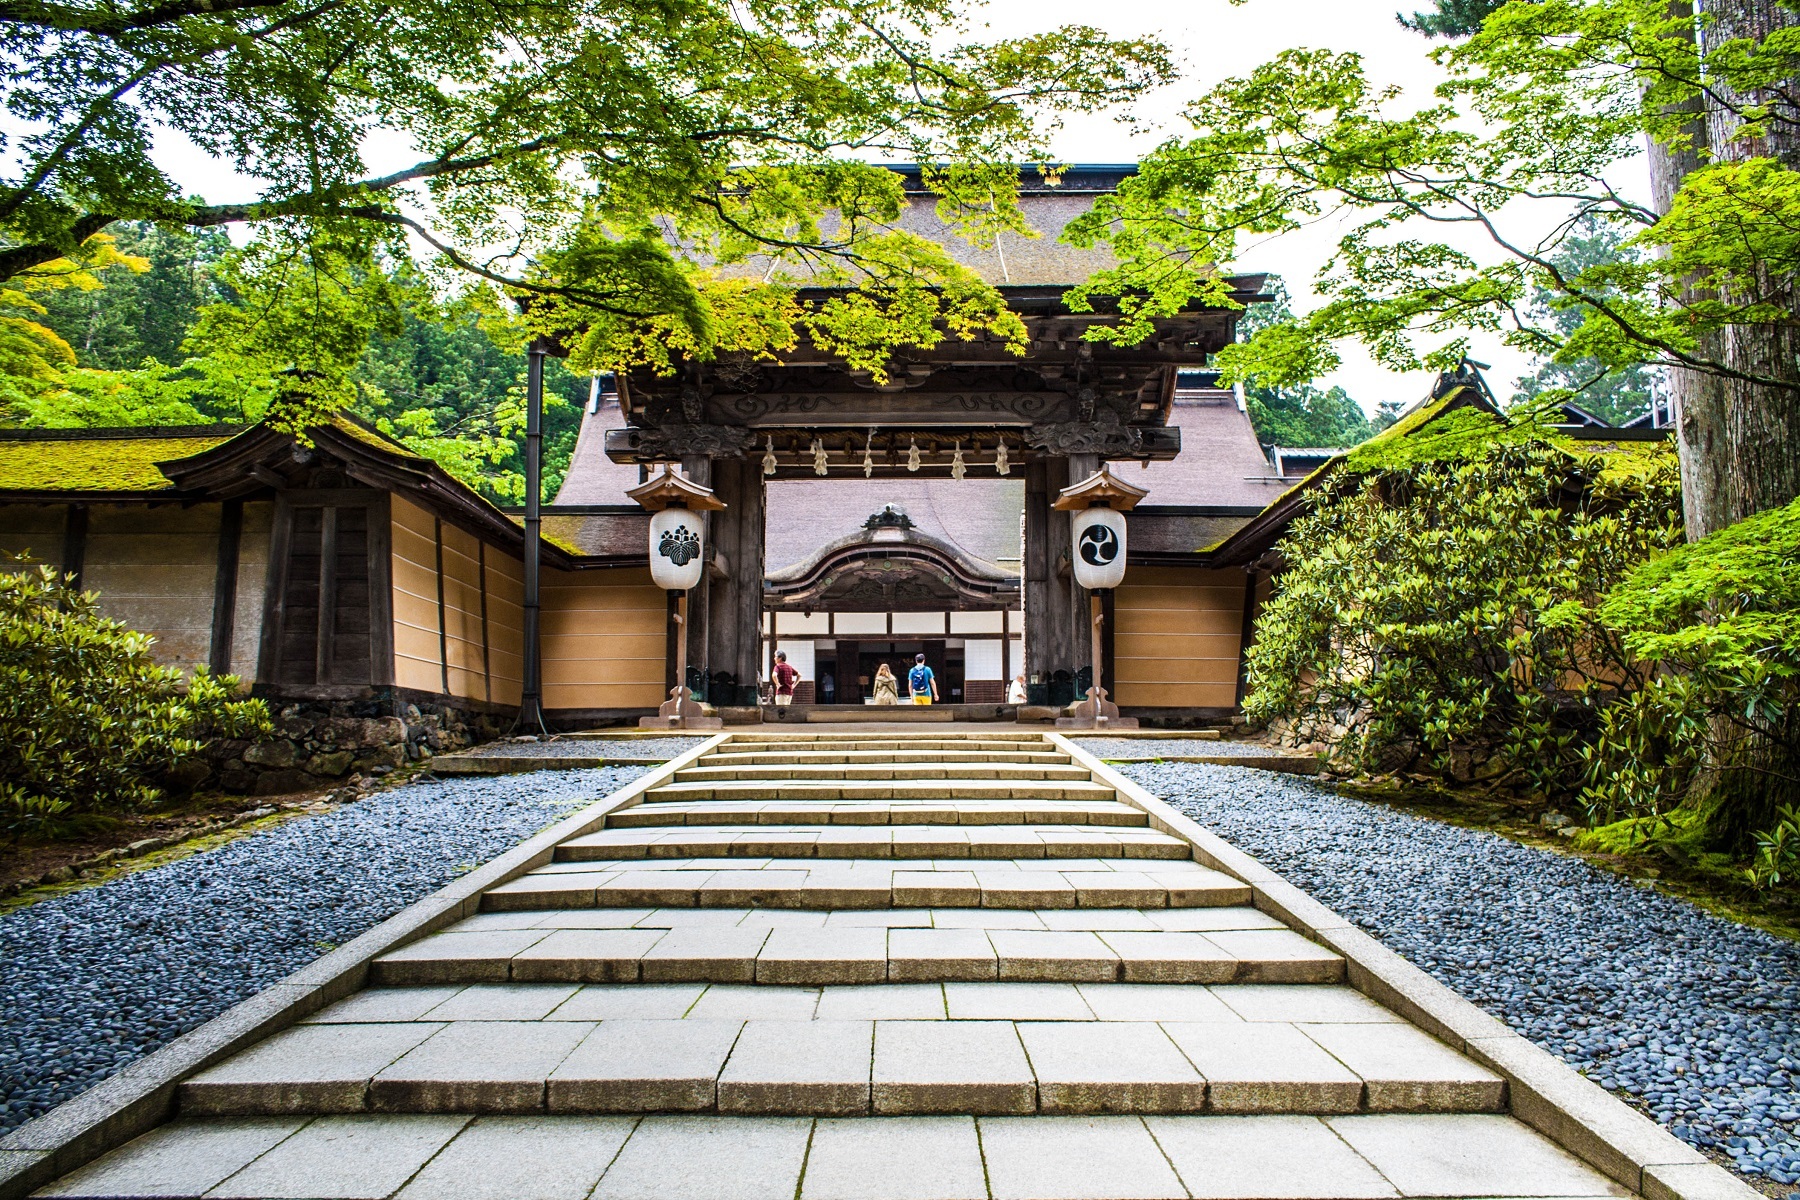 <p>Dedicated to esoteric Buddhism and home to more than 100 temples, <a href="https://www.japan.travel/en/destinations/kansai/wakayama/koyasan/">Koyasan</a> is a vast spiritual complex that spans over 1,200 years of history and tradition. One highlight is Okunoin Temple, a sanctuary filled with statues and lanterns that houses the <a href="https://www.atlasobscura.com/places/okunoin-cemetery">mausoleum</a> of Kobo Daishi, a famous monk. </p><p>Visitors wishing to experience the simple living of Buddhist monks can also stay in one of the 50 <em>shukubo</em>, or temples offering lodgings to weary travellers. </p>